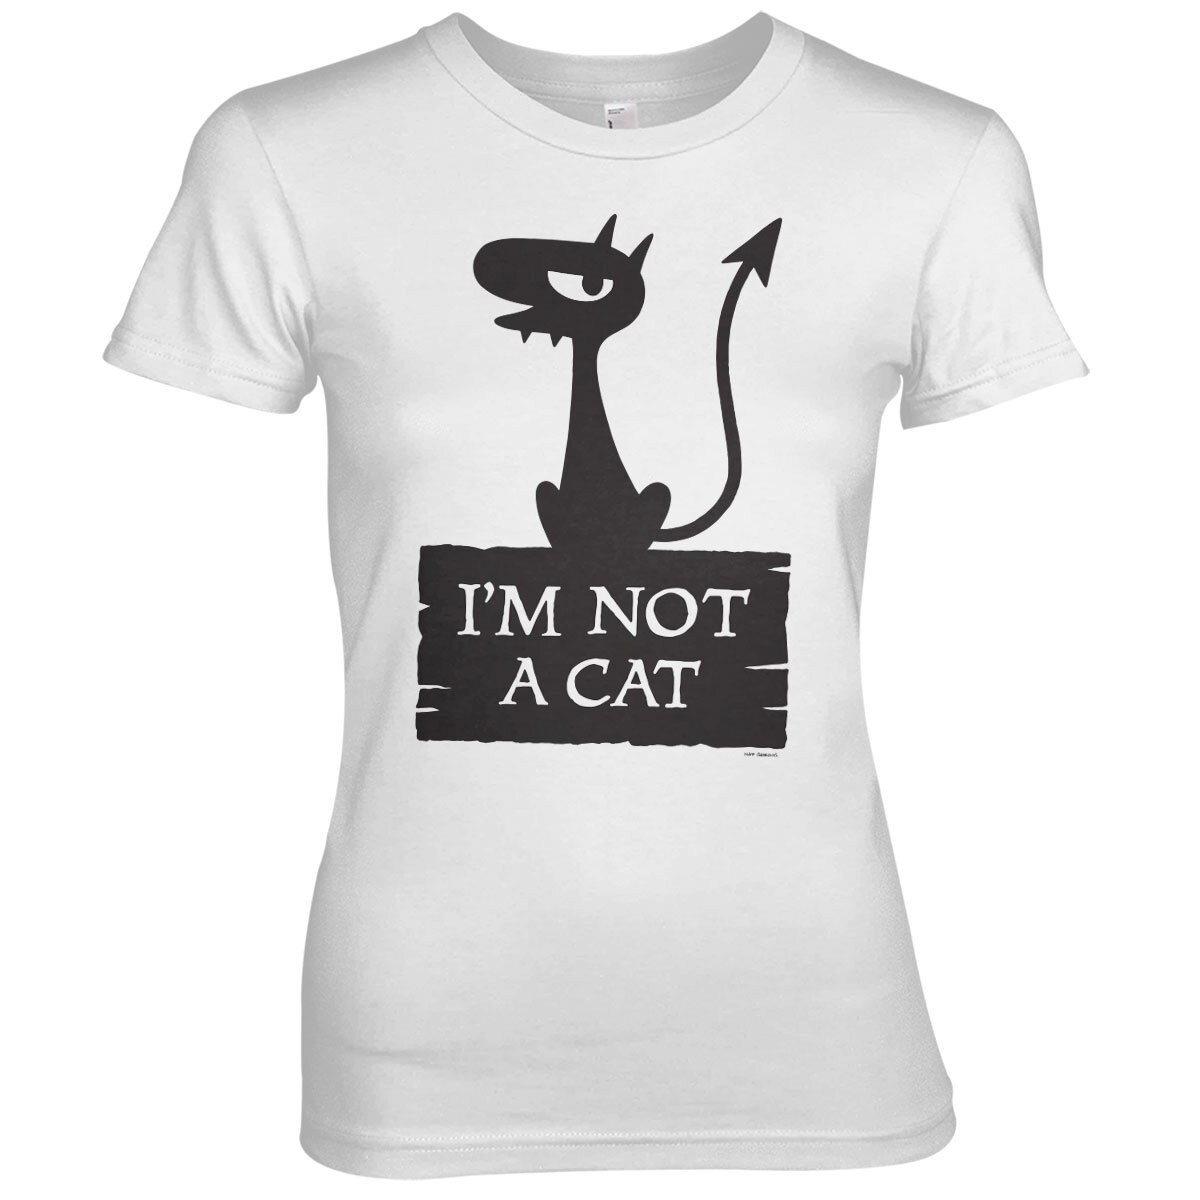 Luci - I'm Not A Cat Girly Tee